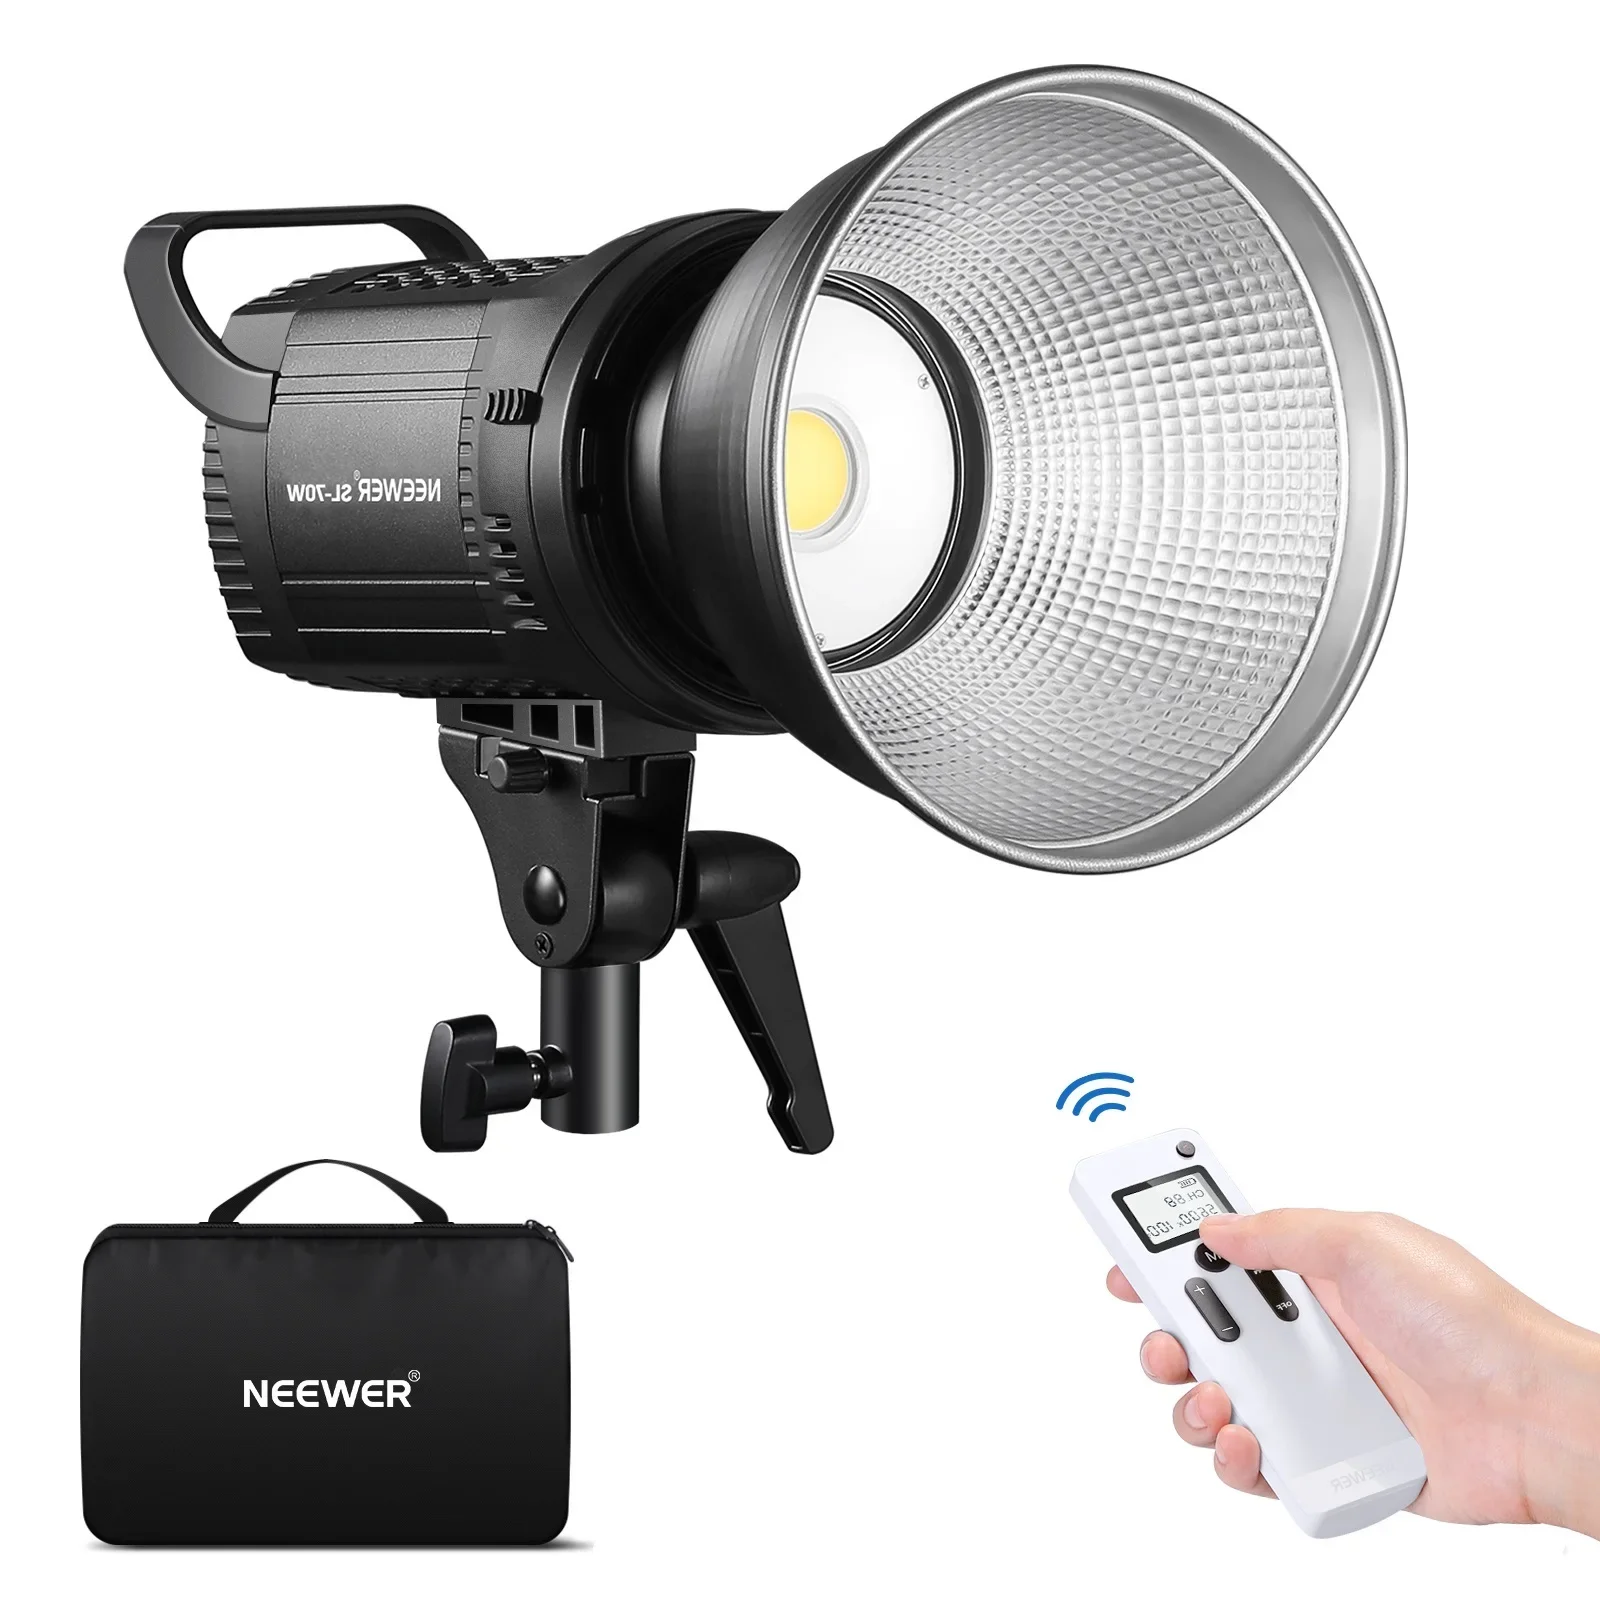 

NEEWER SL-70W COB LED Video Light With 2.4G Remote Control, Continuous Studio Lighting With LCD Panel Lamp; Silent Fan